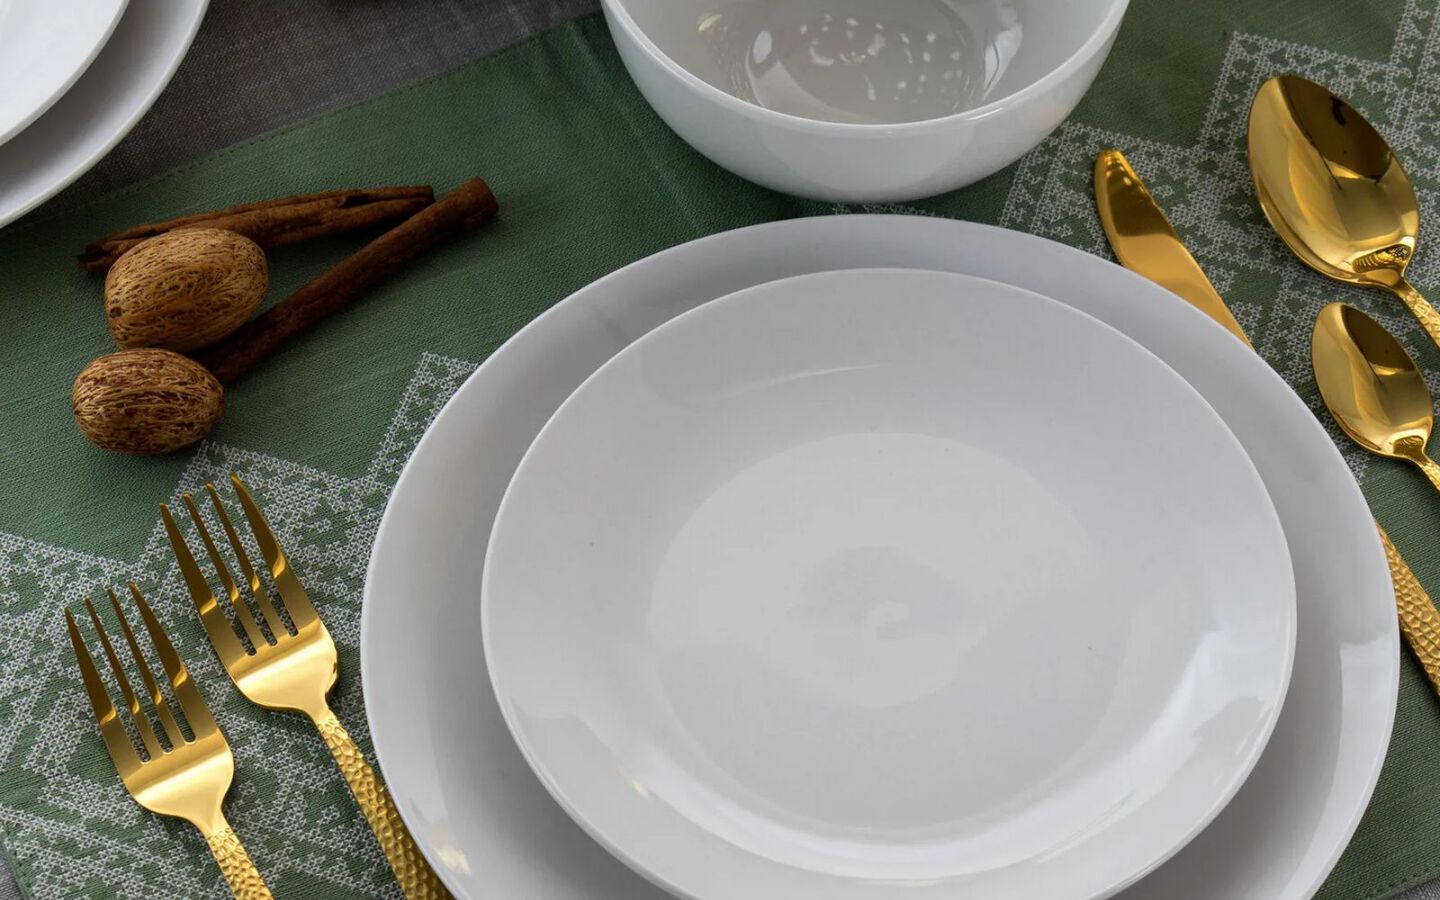 Place setting with white plates, matching bowl, and gold silverware on a green placemat